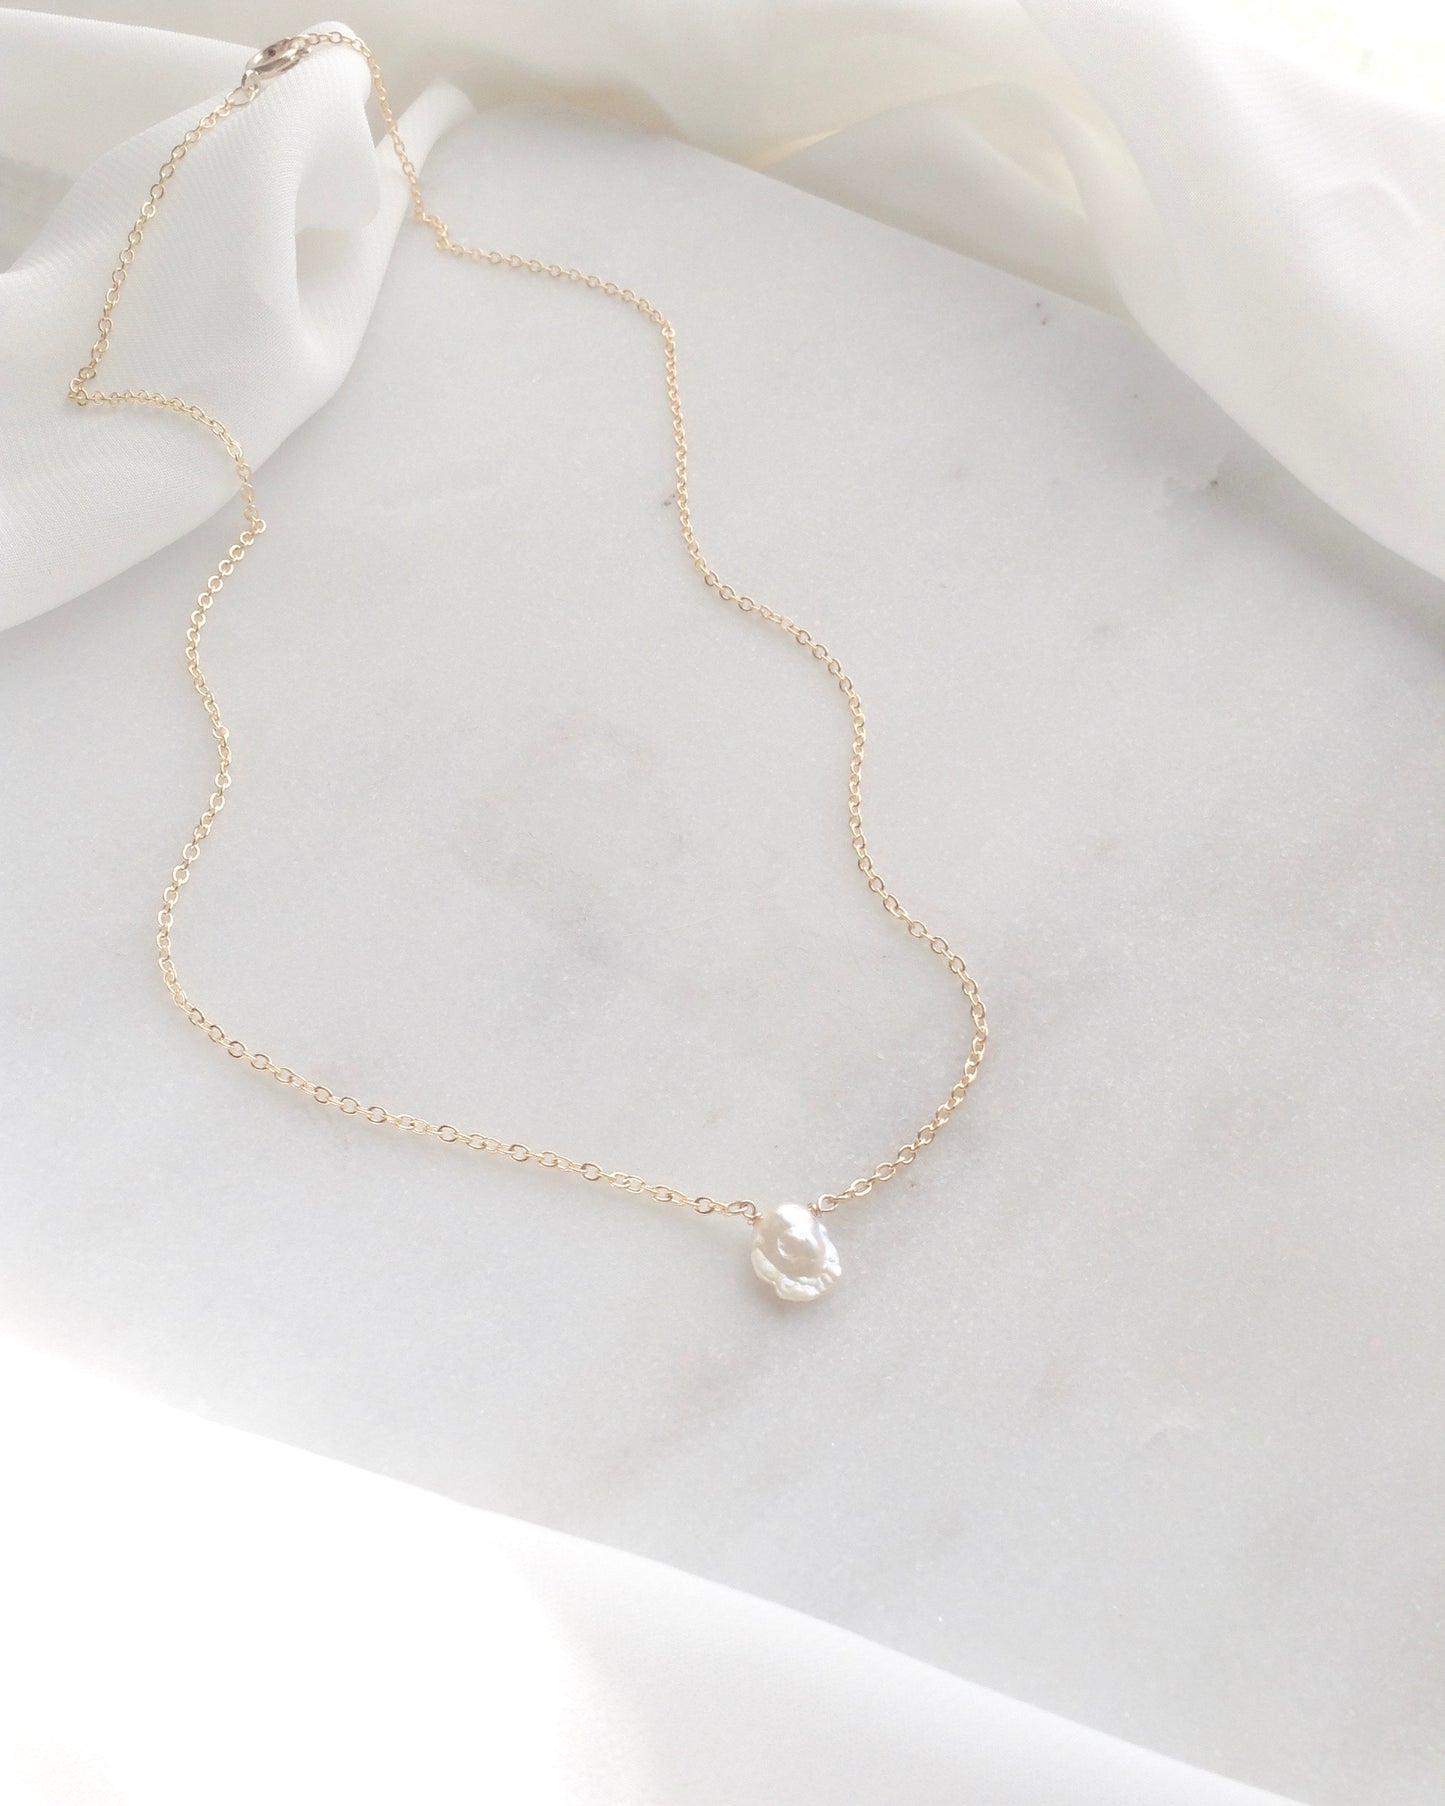 Keshi Pearl Necklace | Delicate Pearl Necklace | IB Jewelry